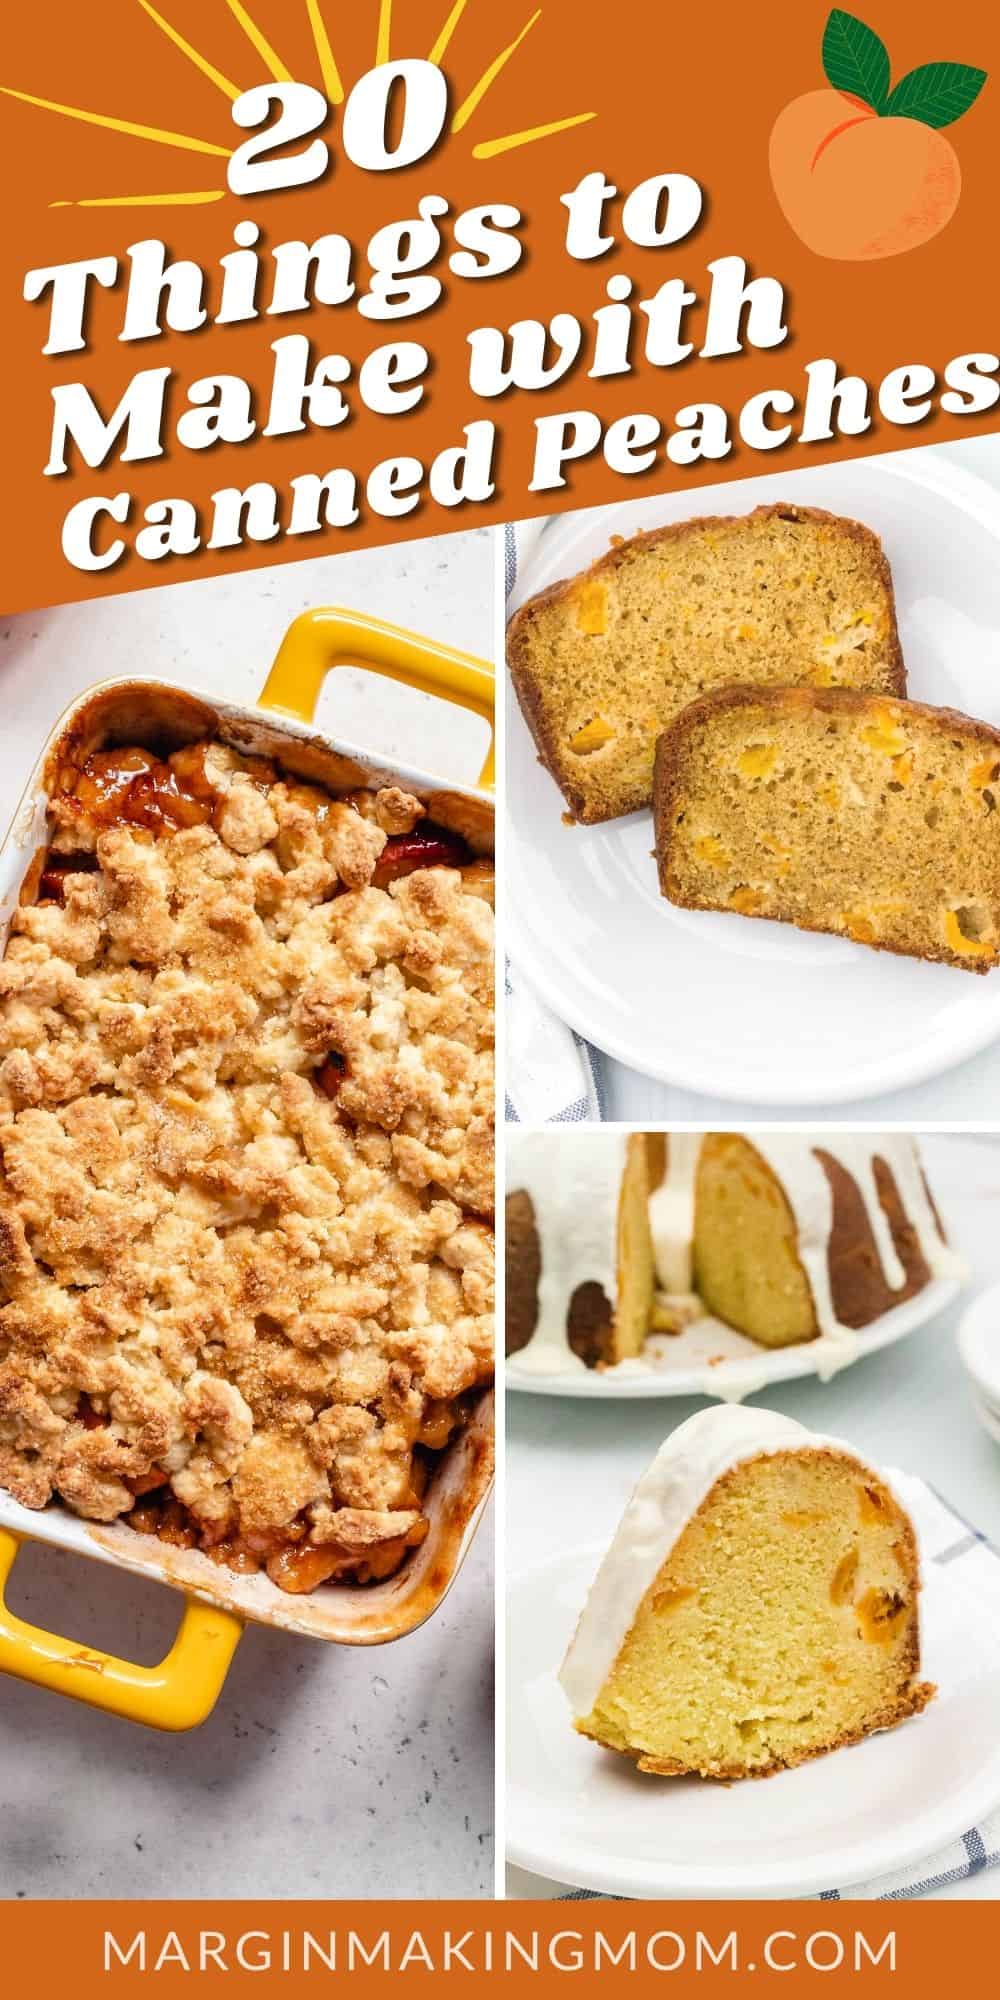 collage image showing three photos of recipes made with canned peaches, including cobbler, bread, and cake.